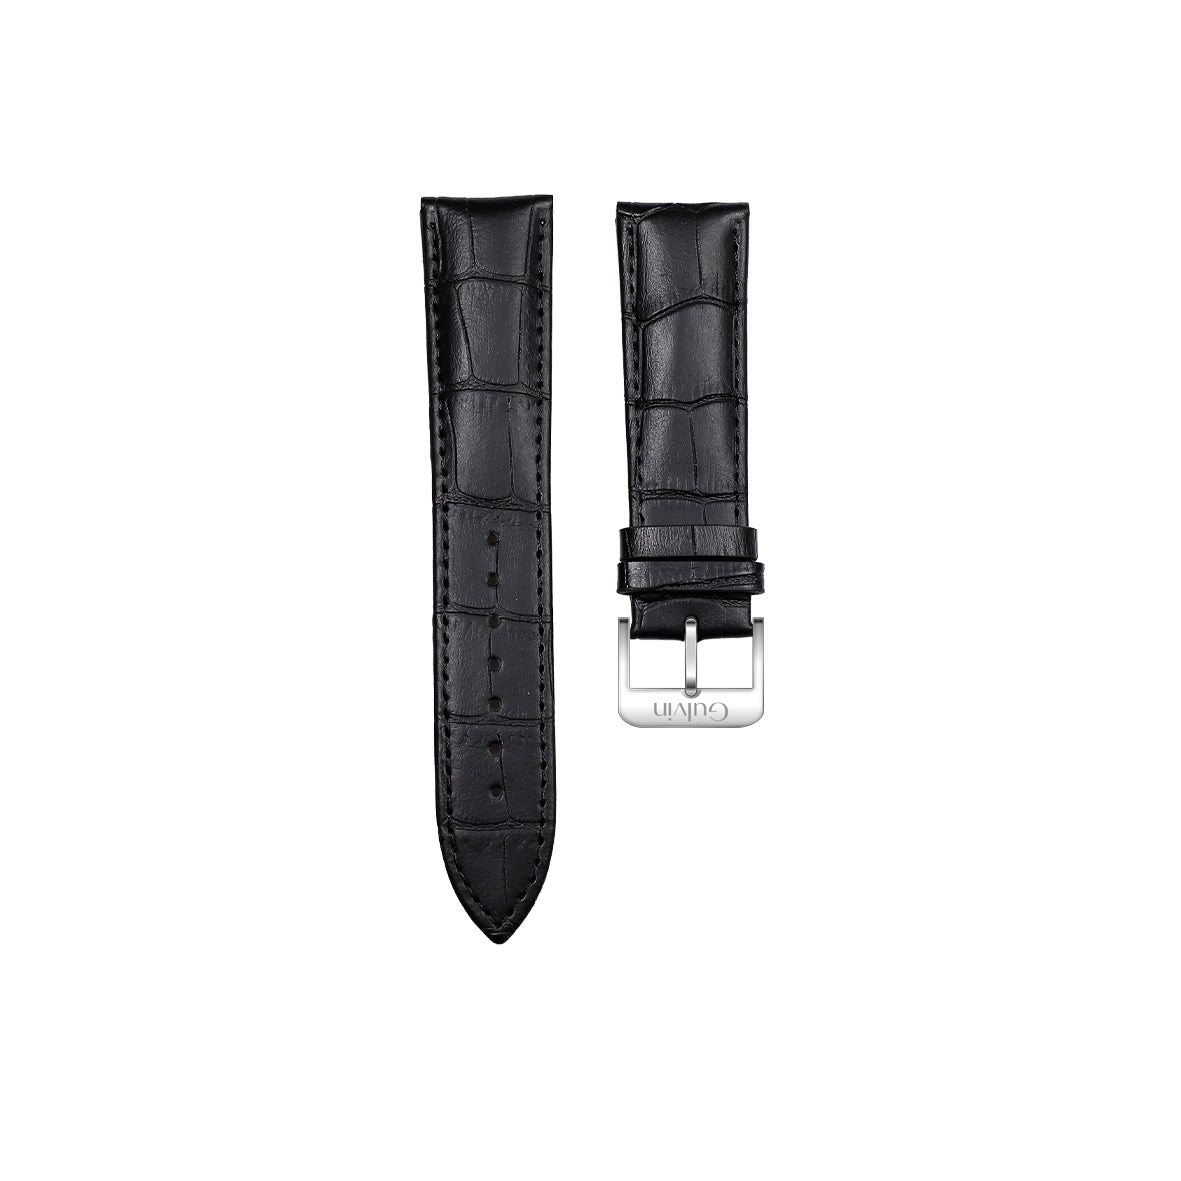 Gulvin black leather strap - Luxury only